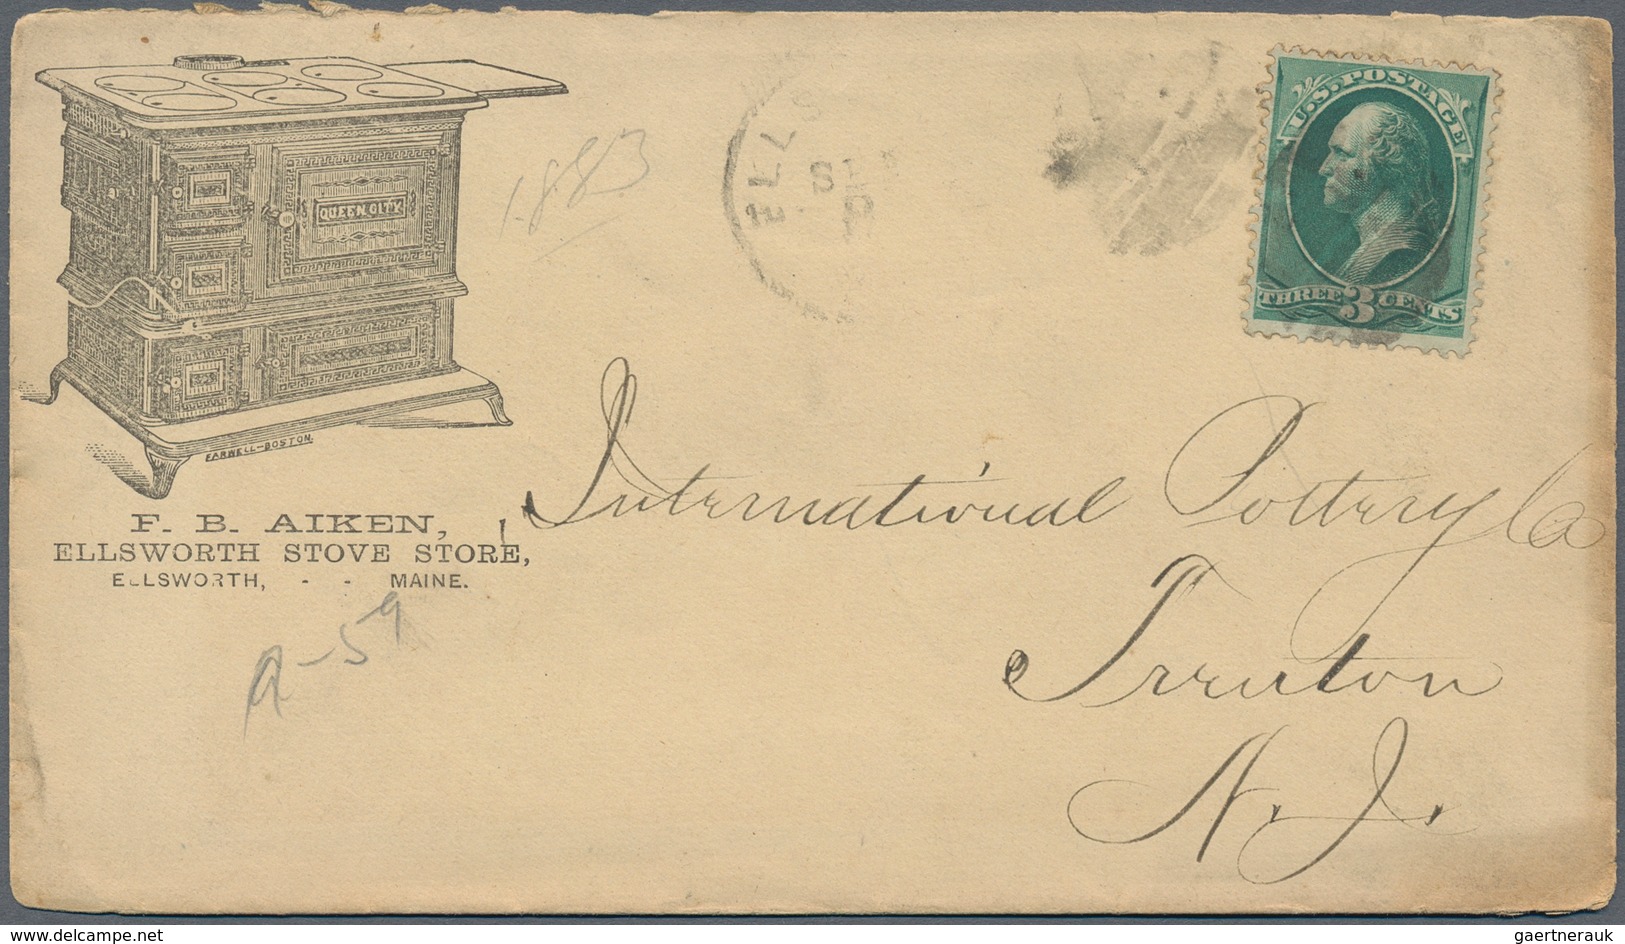 Vereinigte Staaten von Amerika: from 1839 holding of about 600 letters, cards and various covers, in